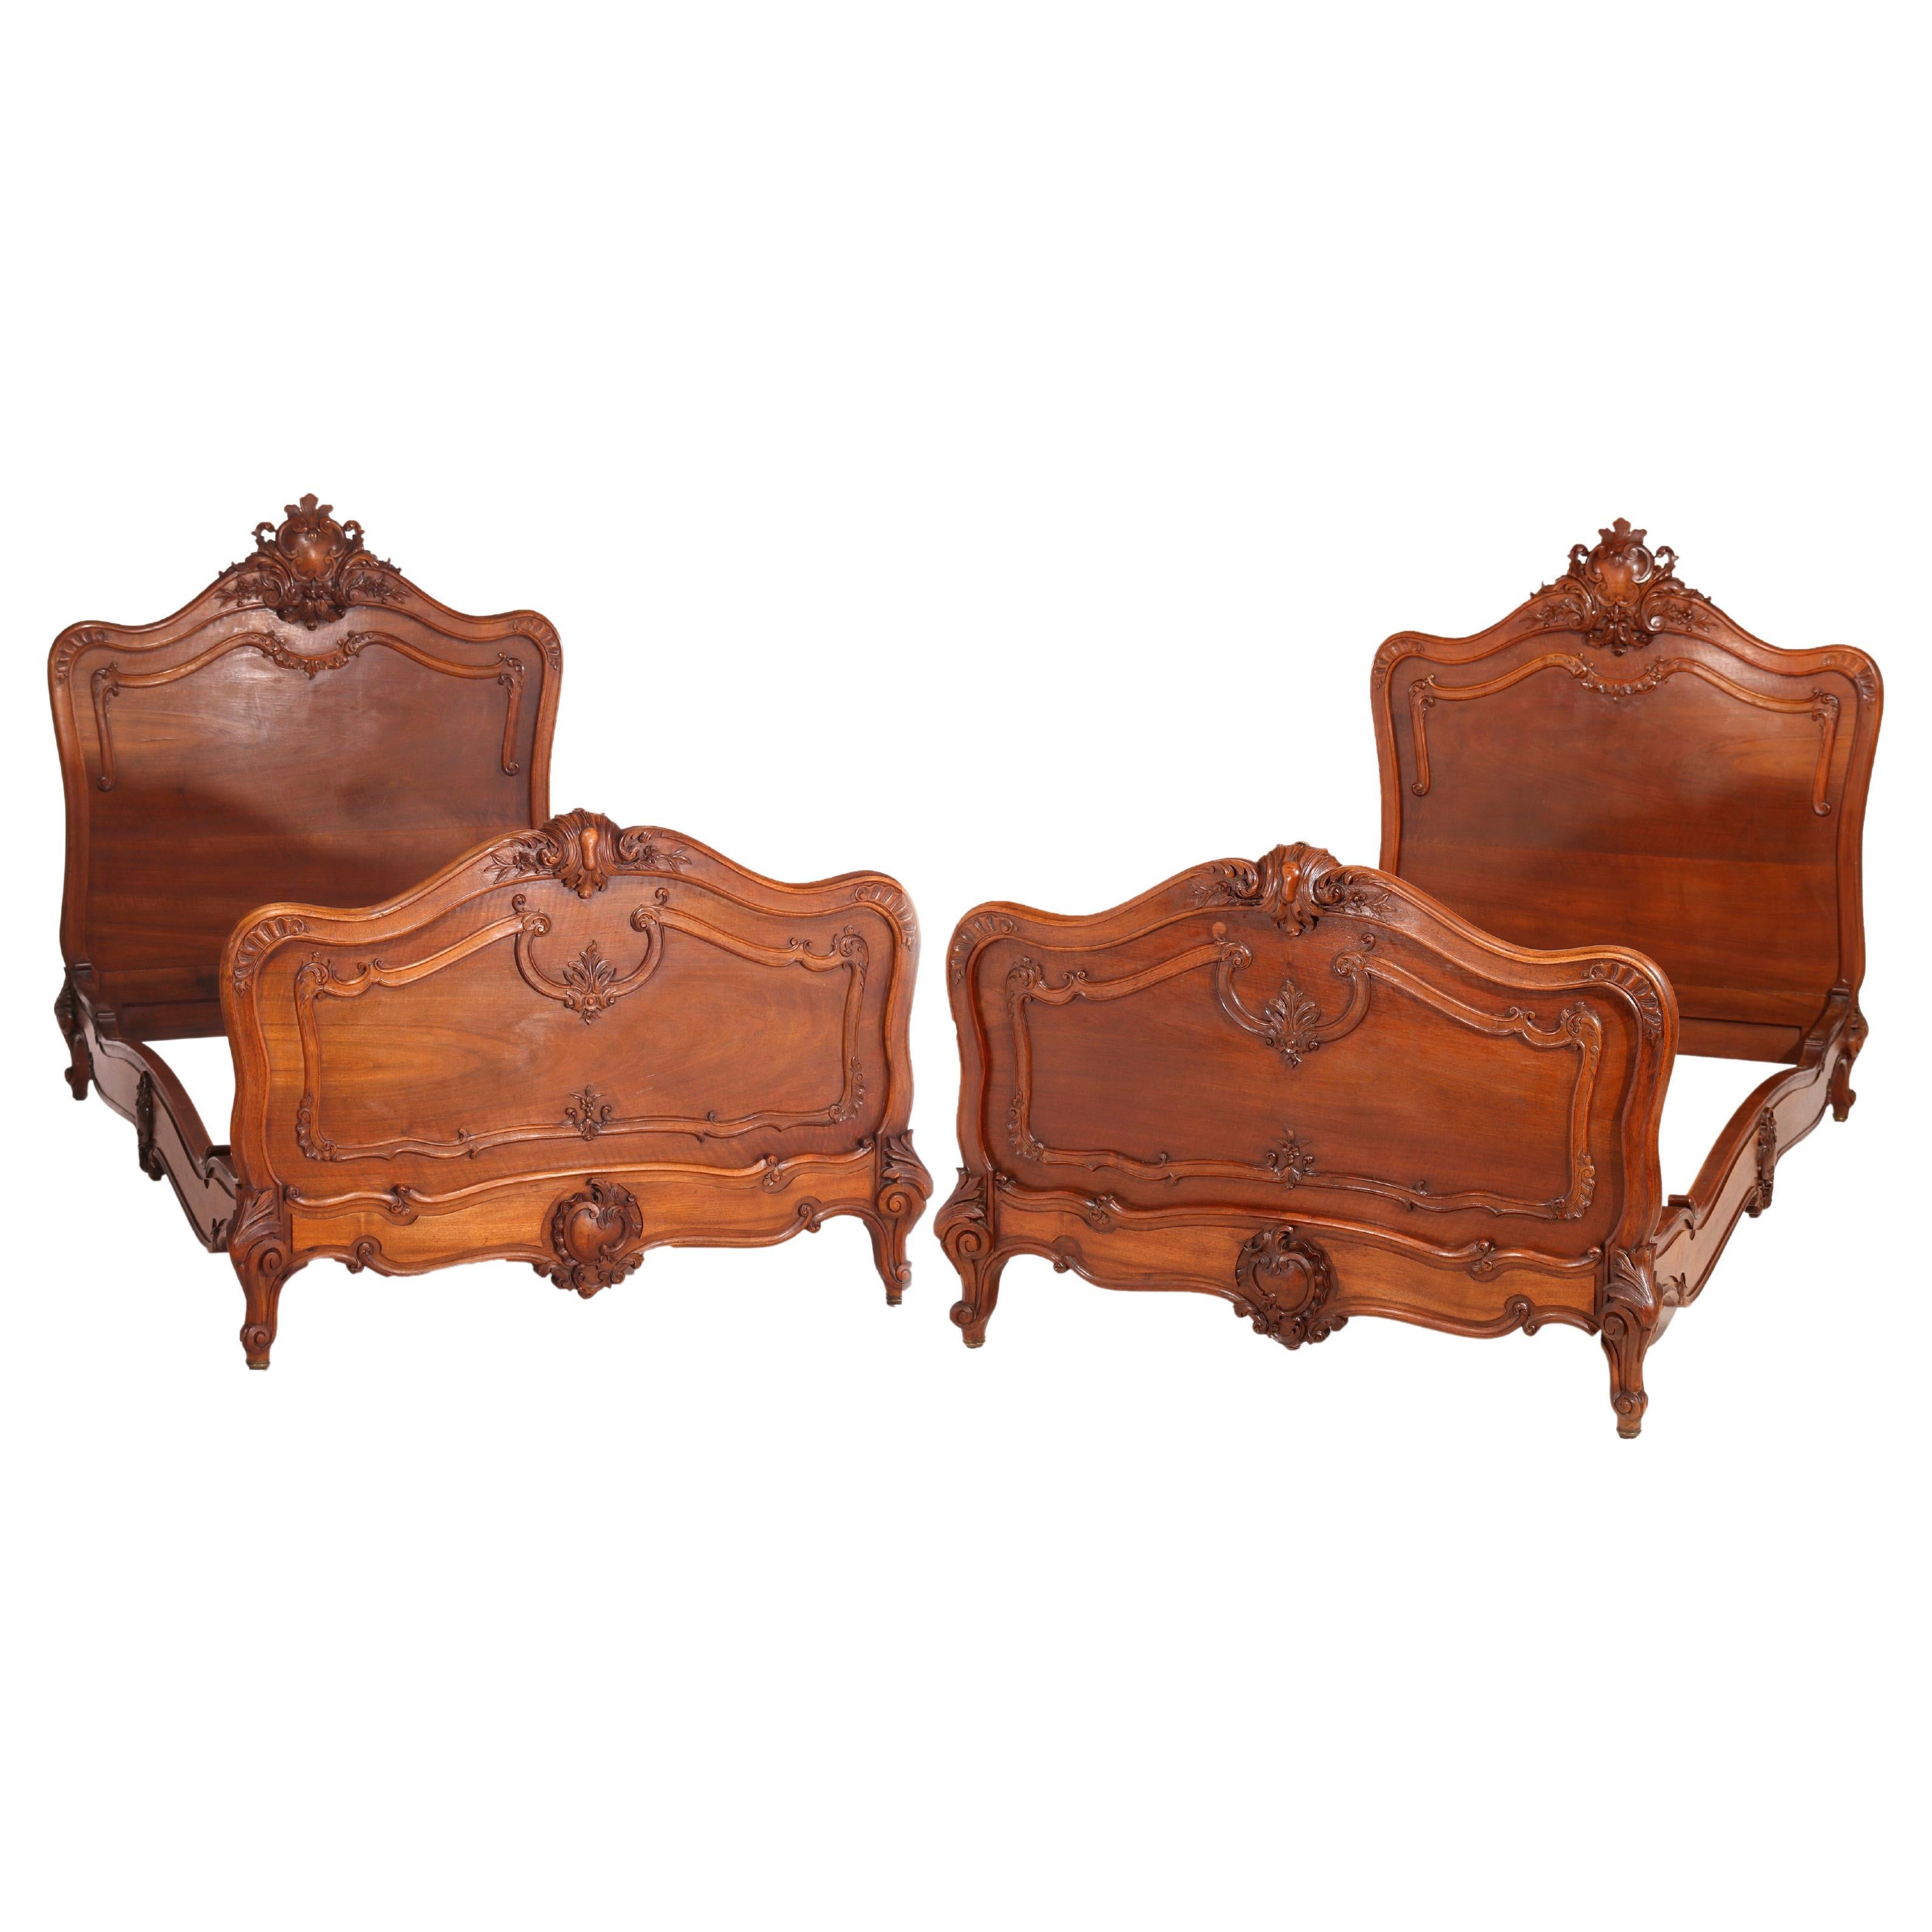 Antique Pair Antique French Rococo Carved Mahogany Twin Beds, 19th Century